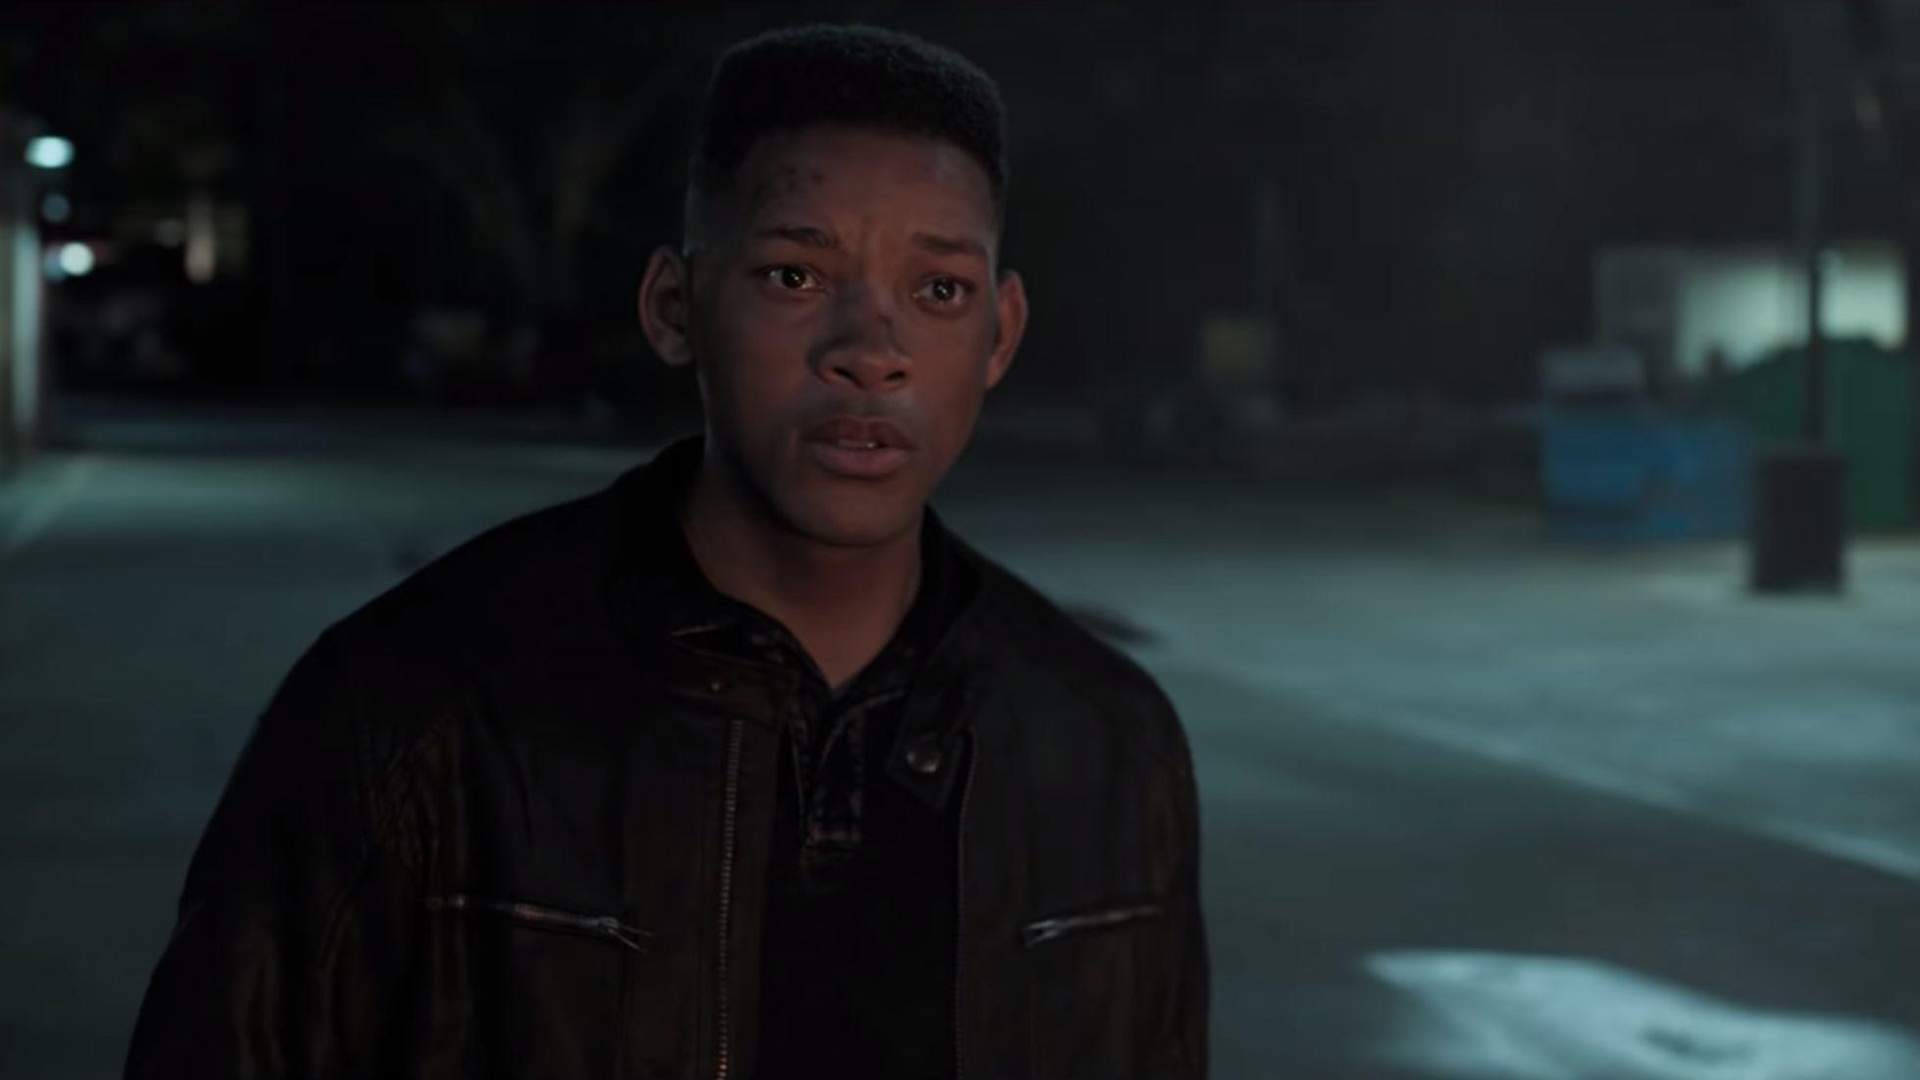 The Trailer for New Sci-Fi Thriller 'Gemini Man' Serves Up Two Will Smiths for the Price of One